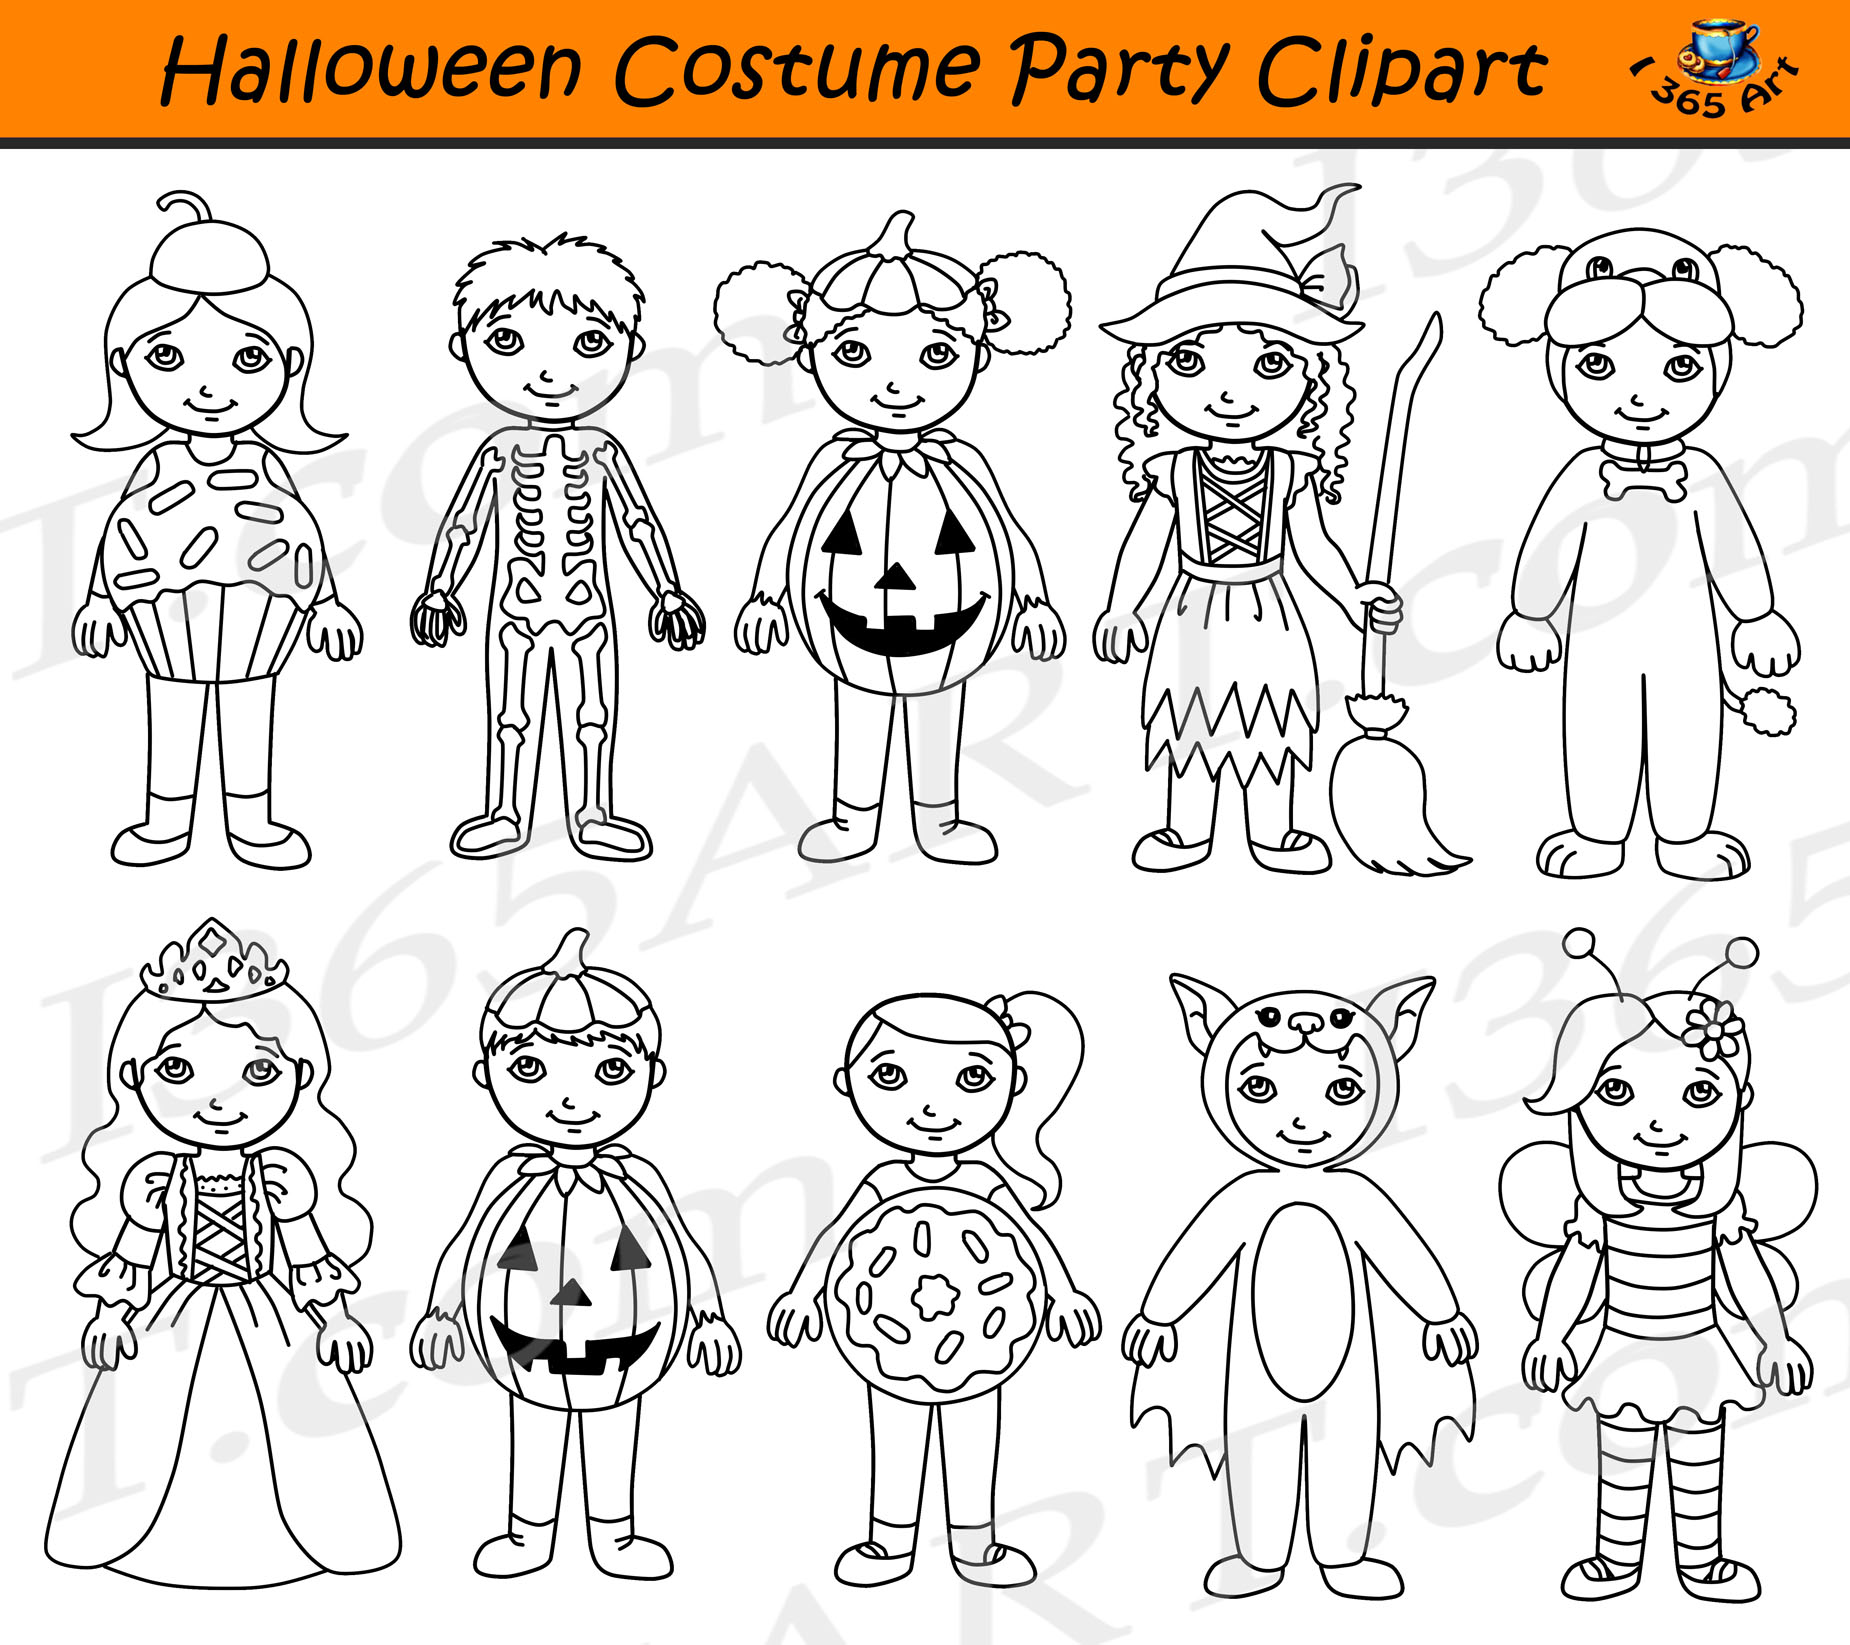 Halloween Costume Party Clipart Kids